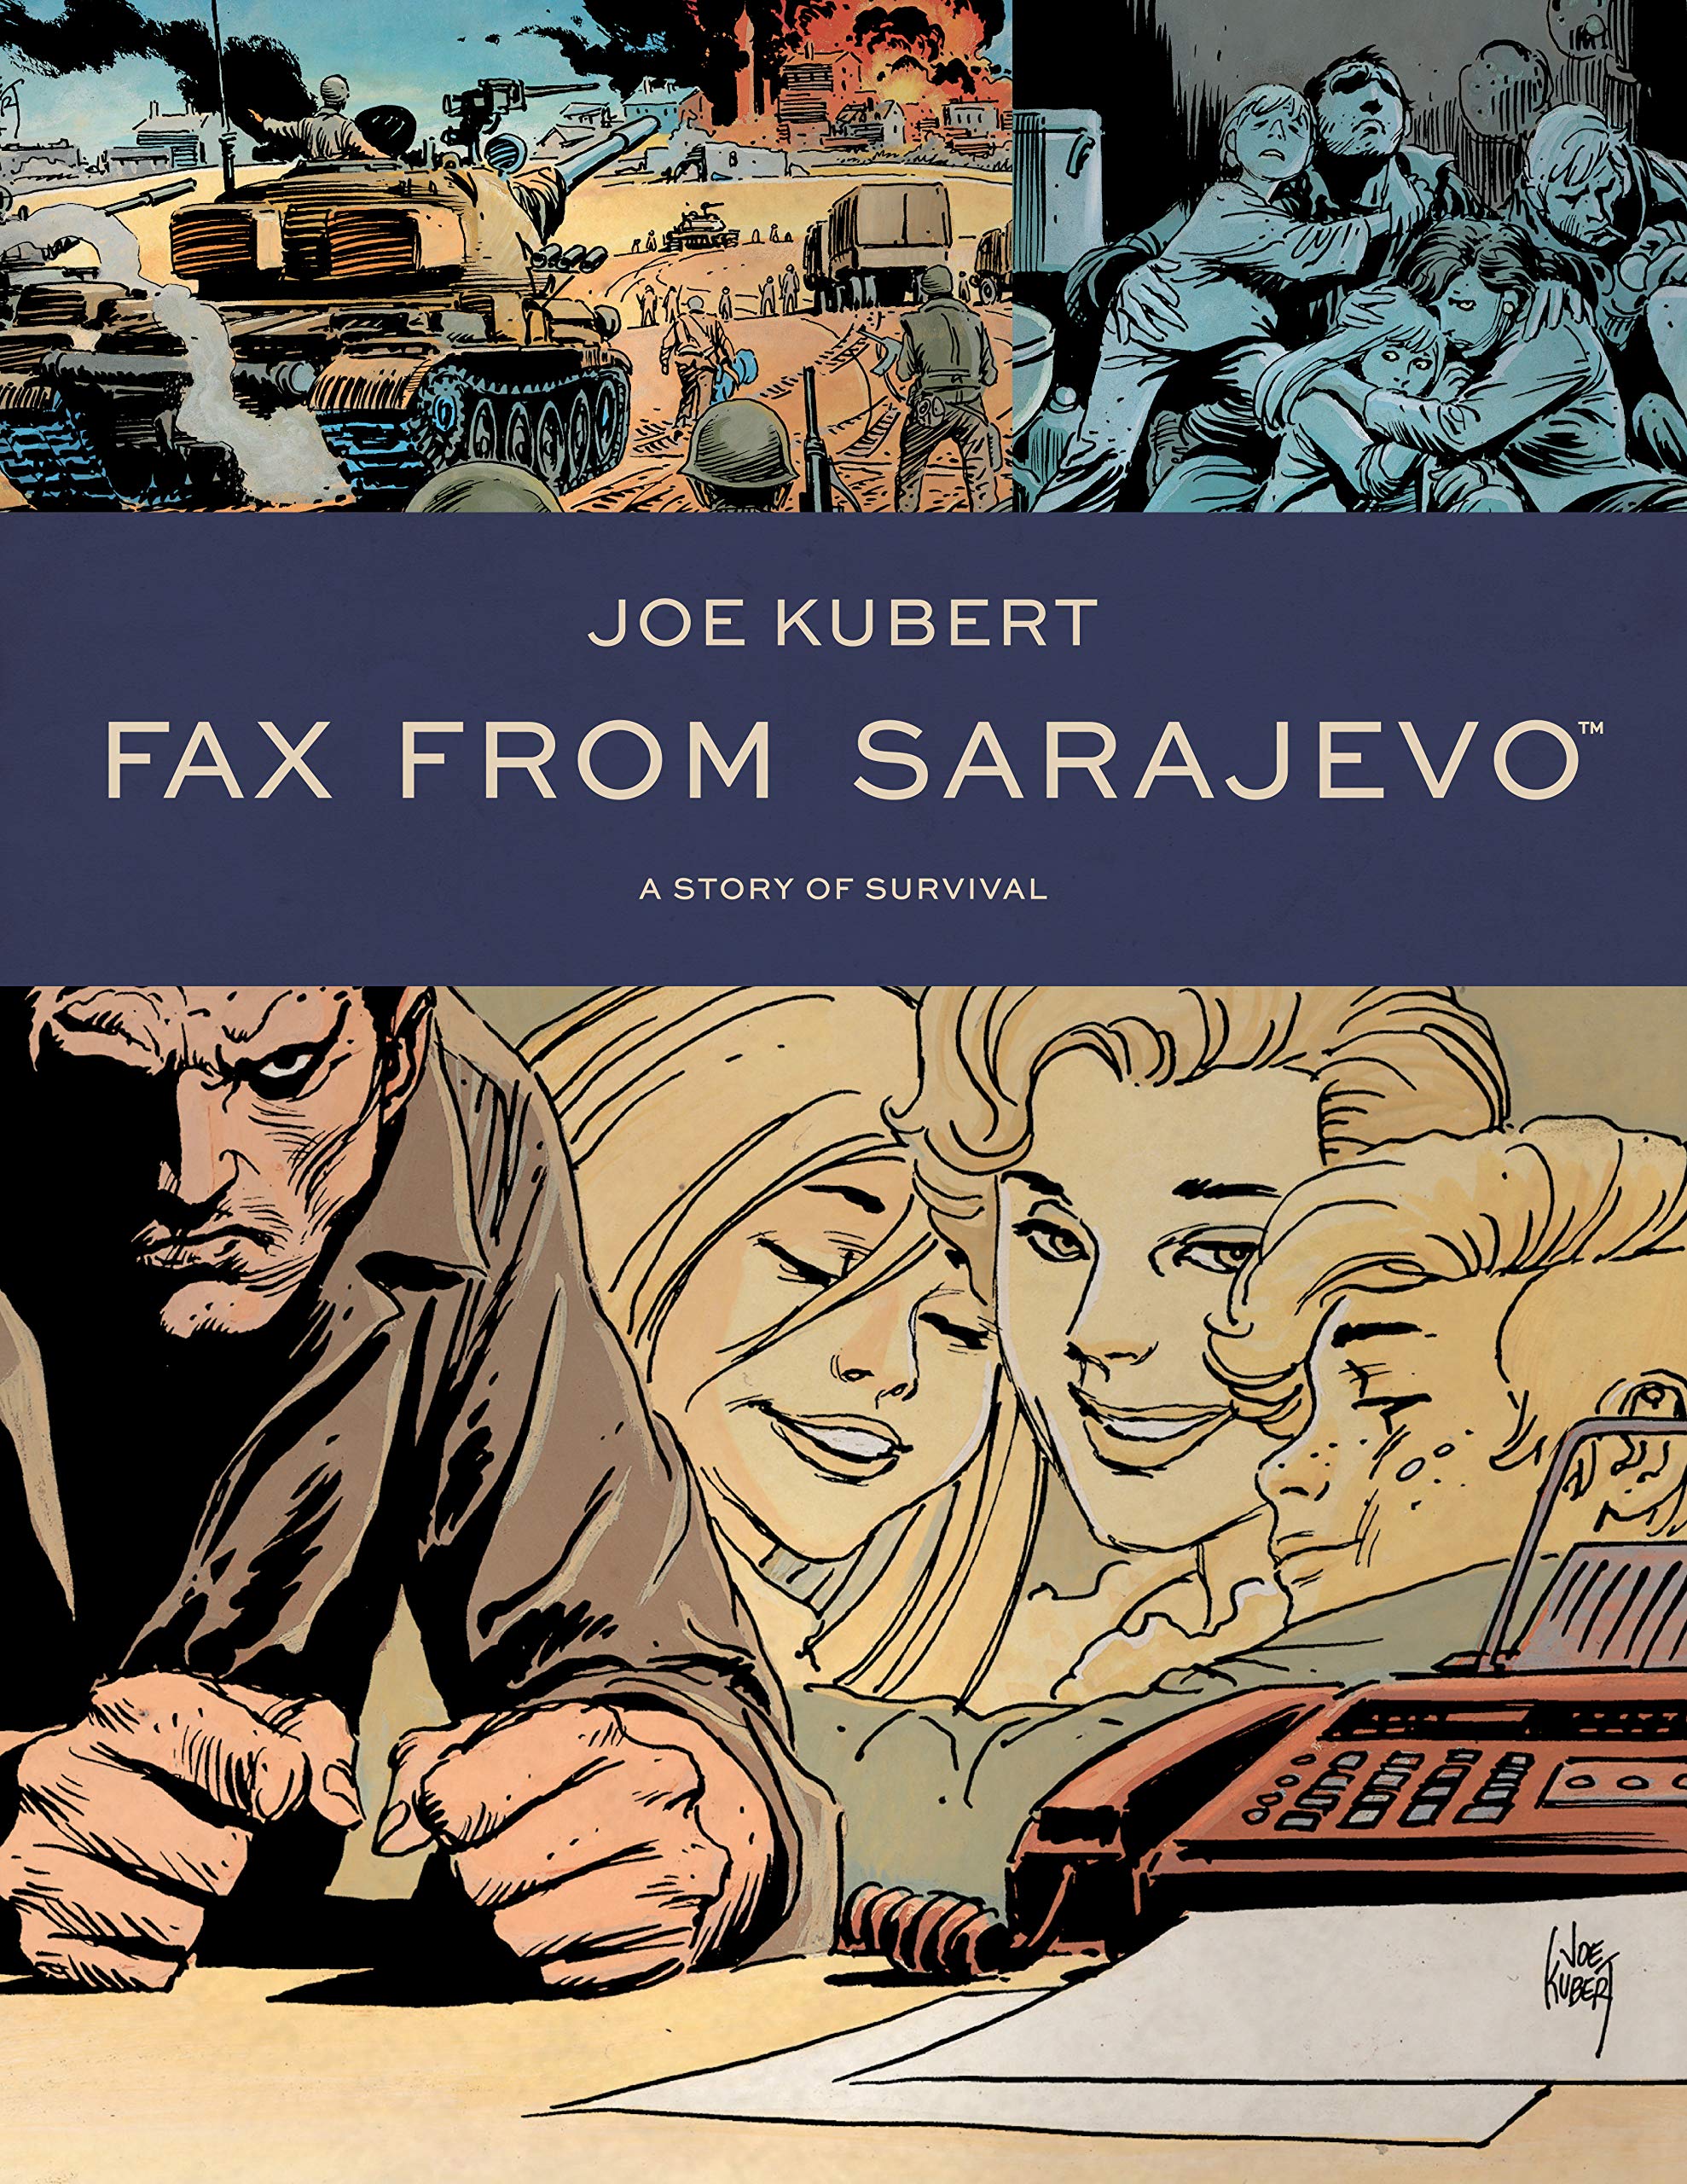 Graphic Novels for Winter 2020: Fax from Sarajevo